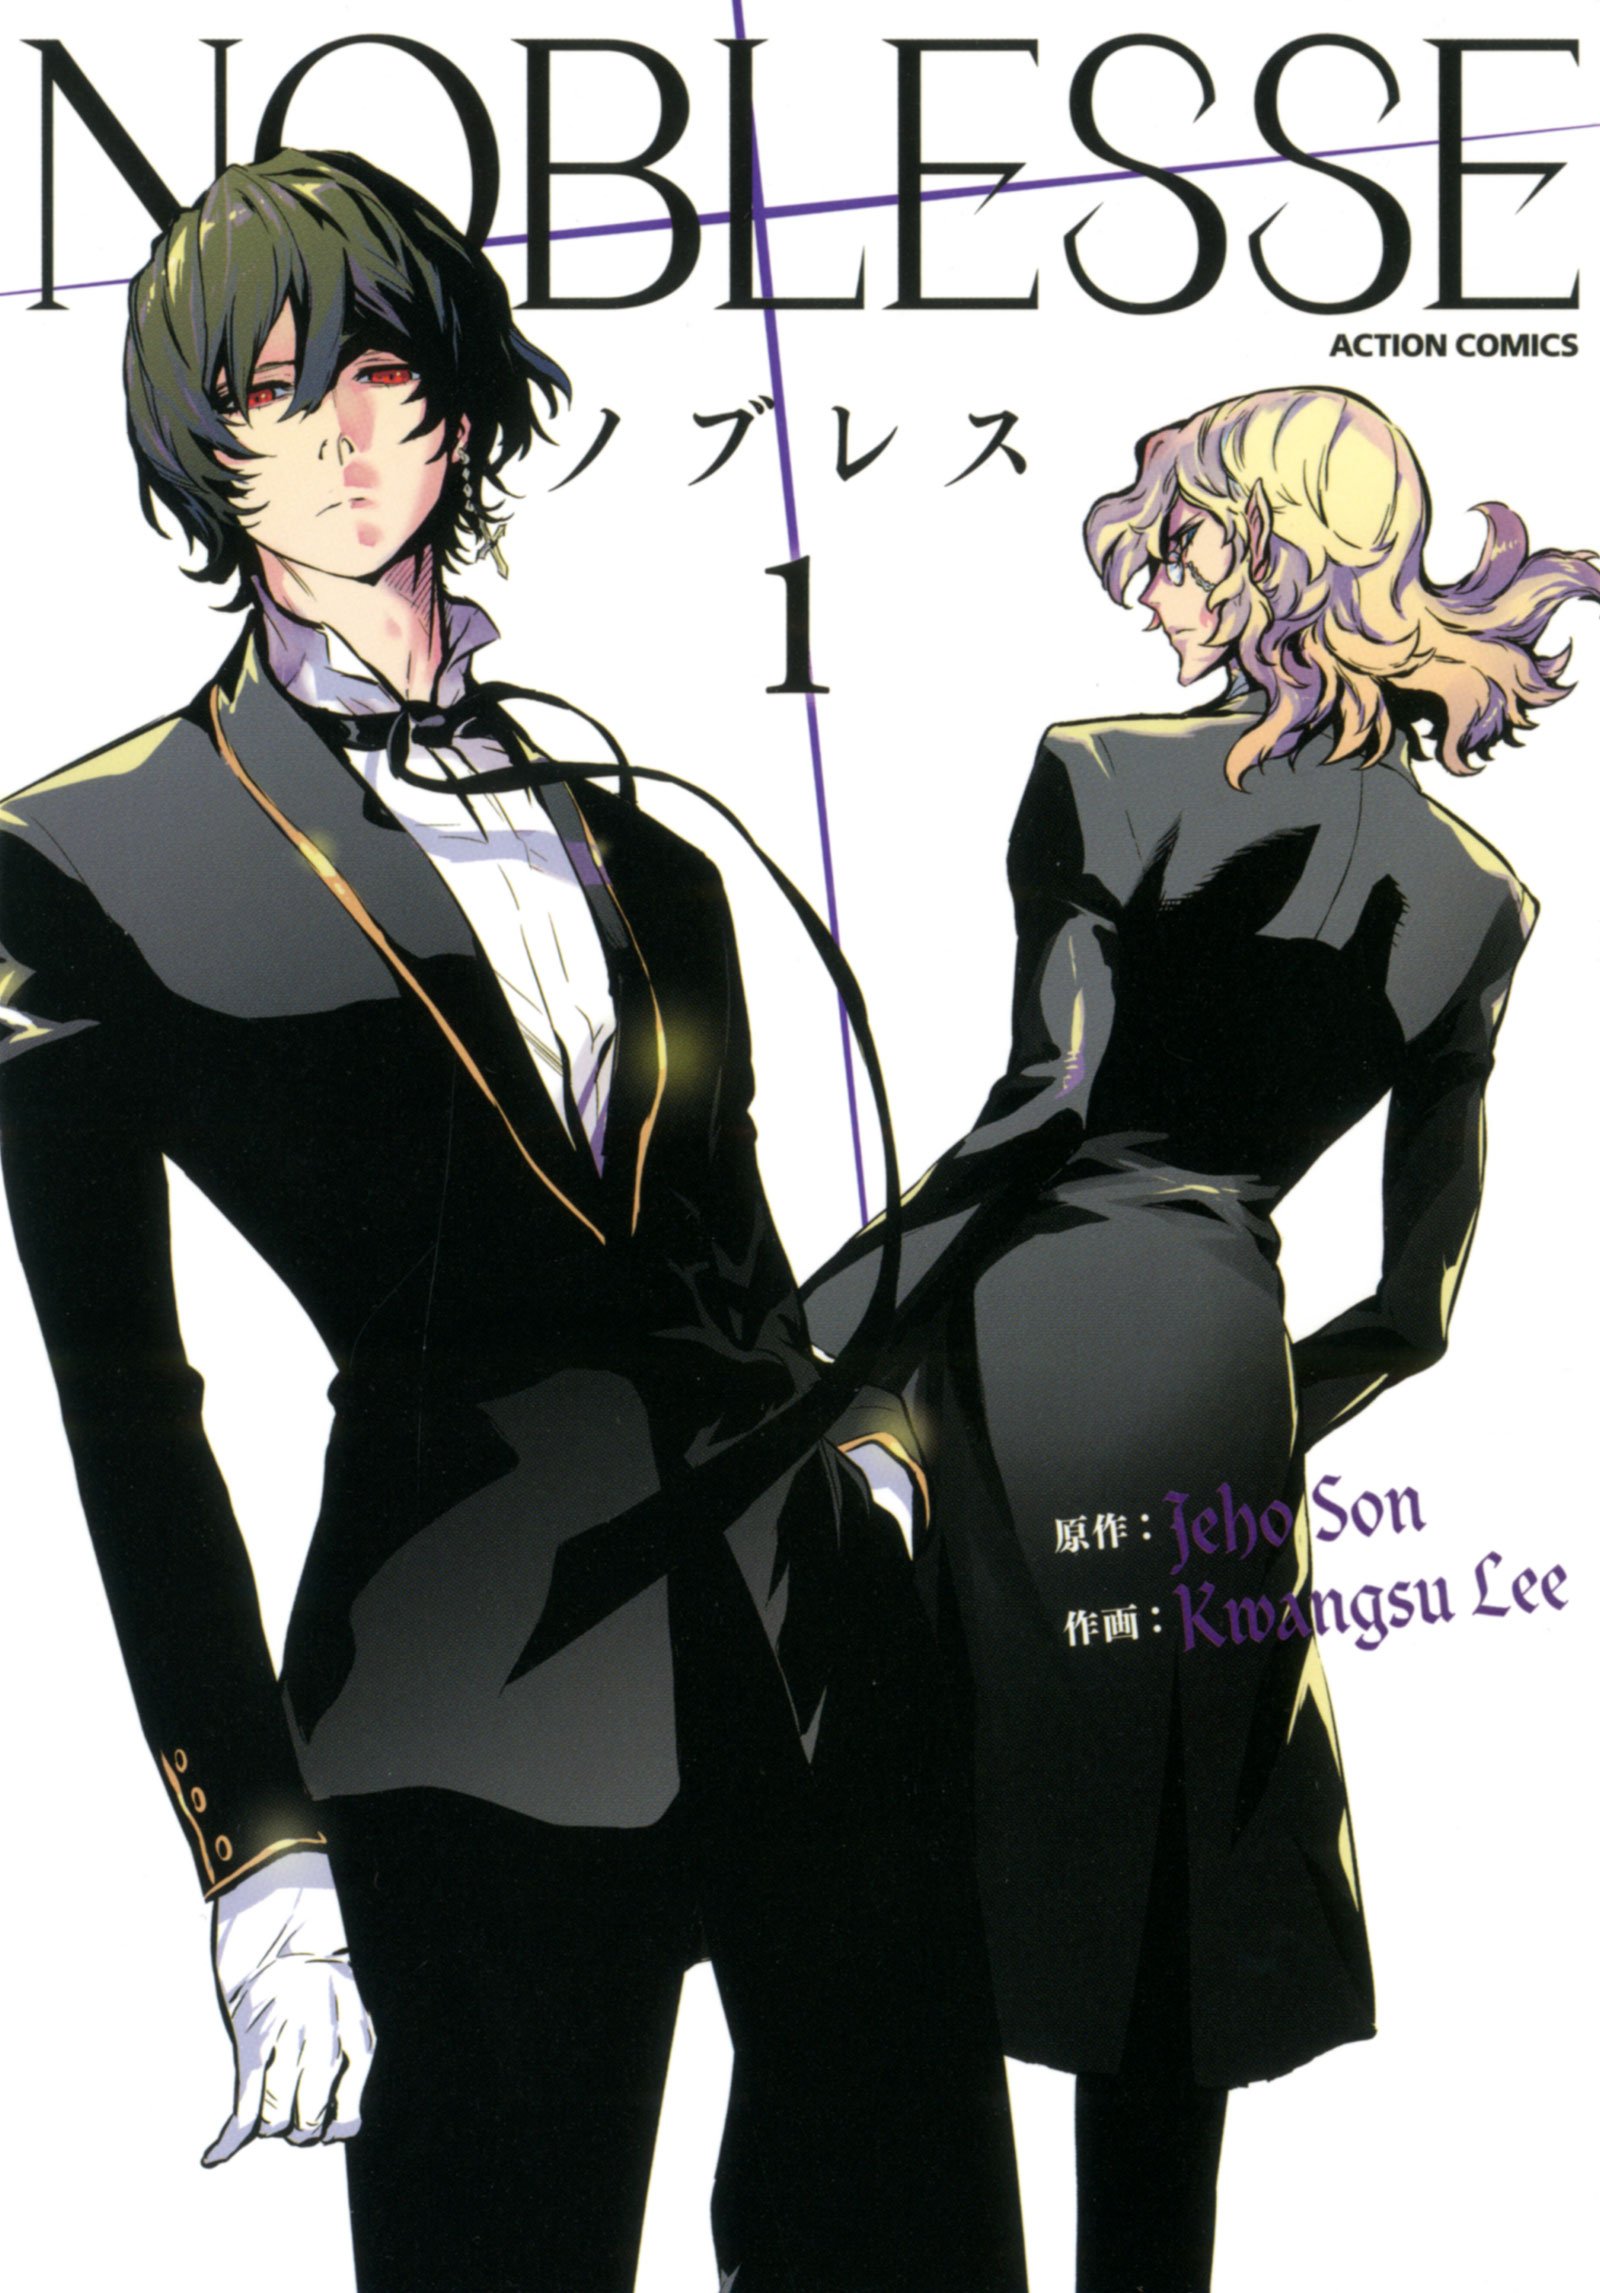 NOBLESSE 1